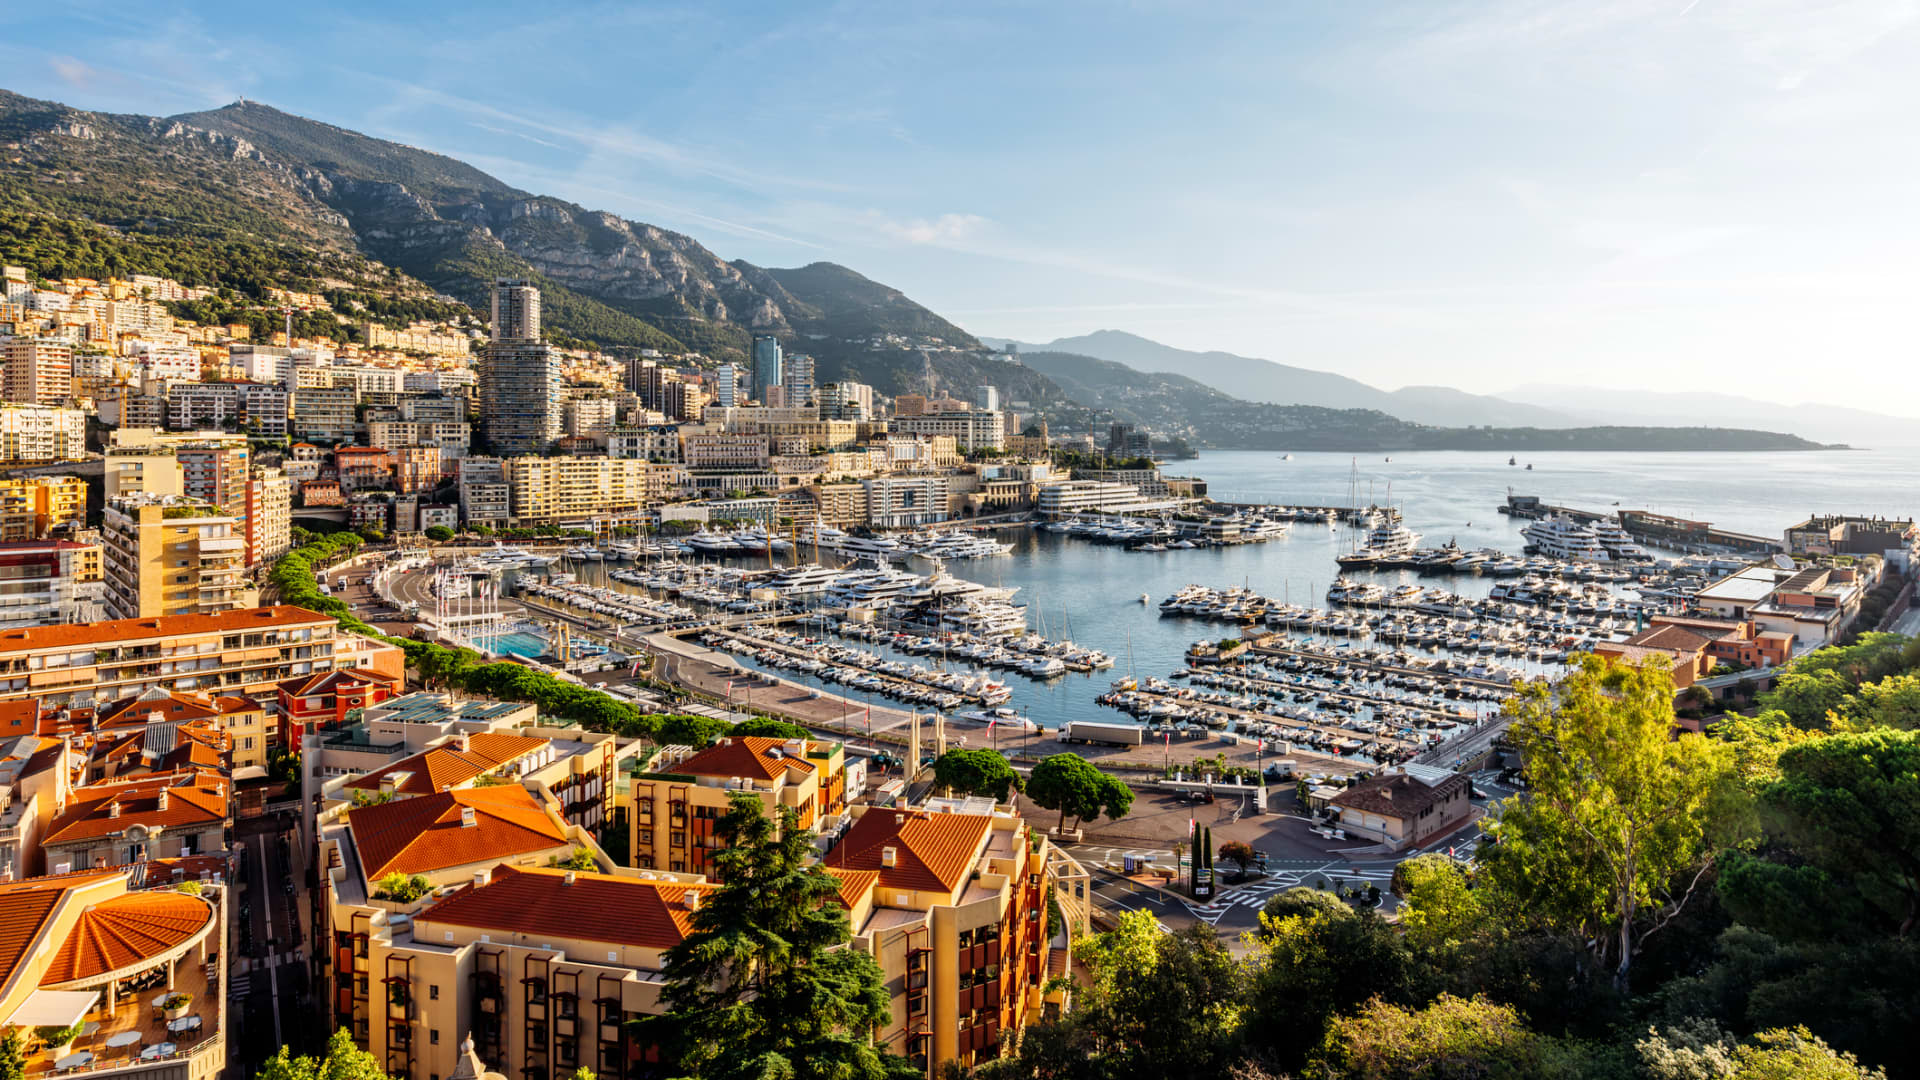 Monaco has long been a playground for the elite, but wealthy travelers are increasingly opting for more remote locations, say luxury travel advisors. 